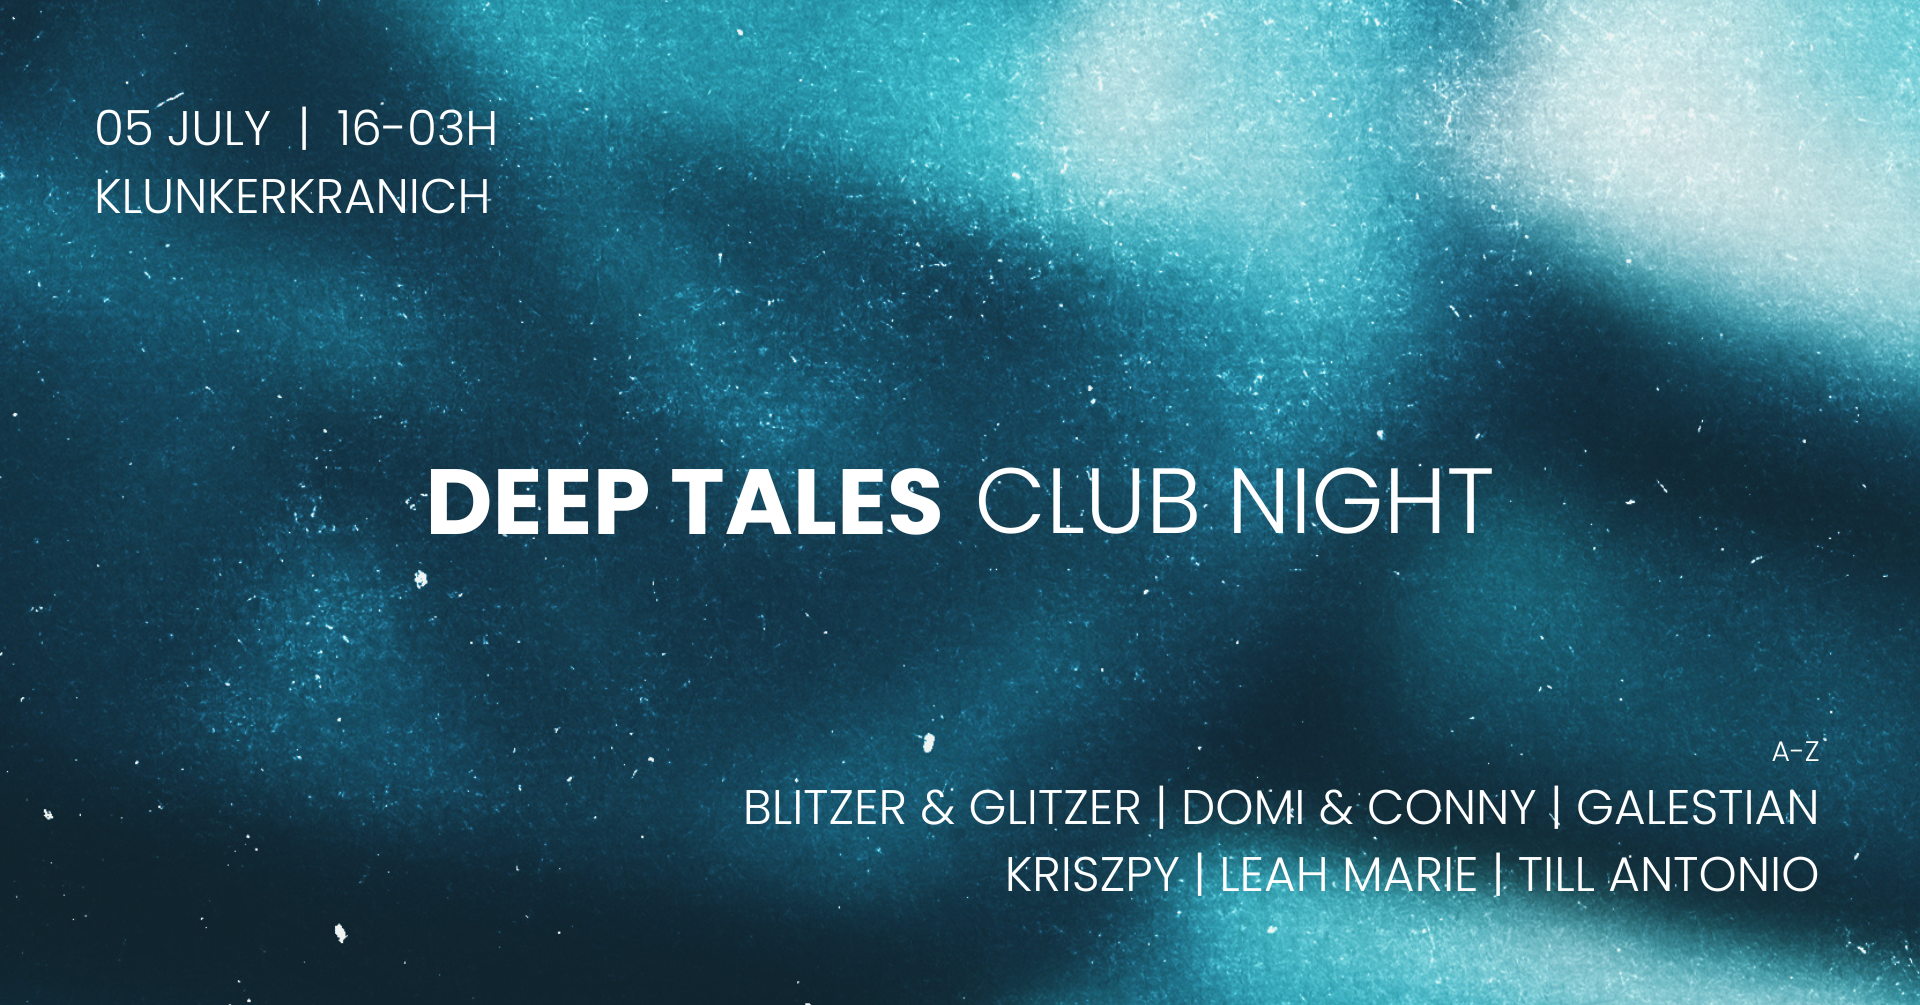 DEEP TALES - club night with Galestian, Kriszpy, Till Antonio, Leah Marie, uvm - フライヤー表